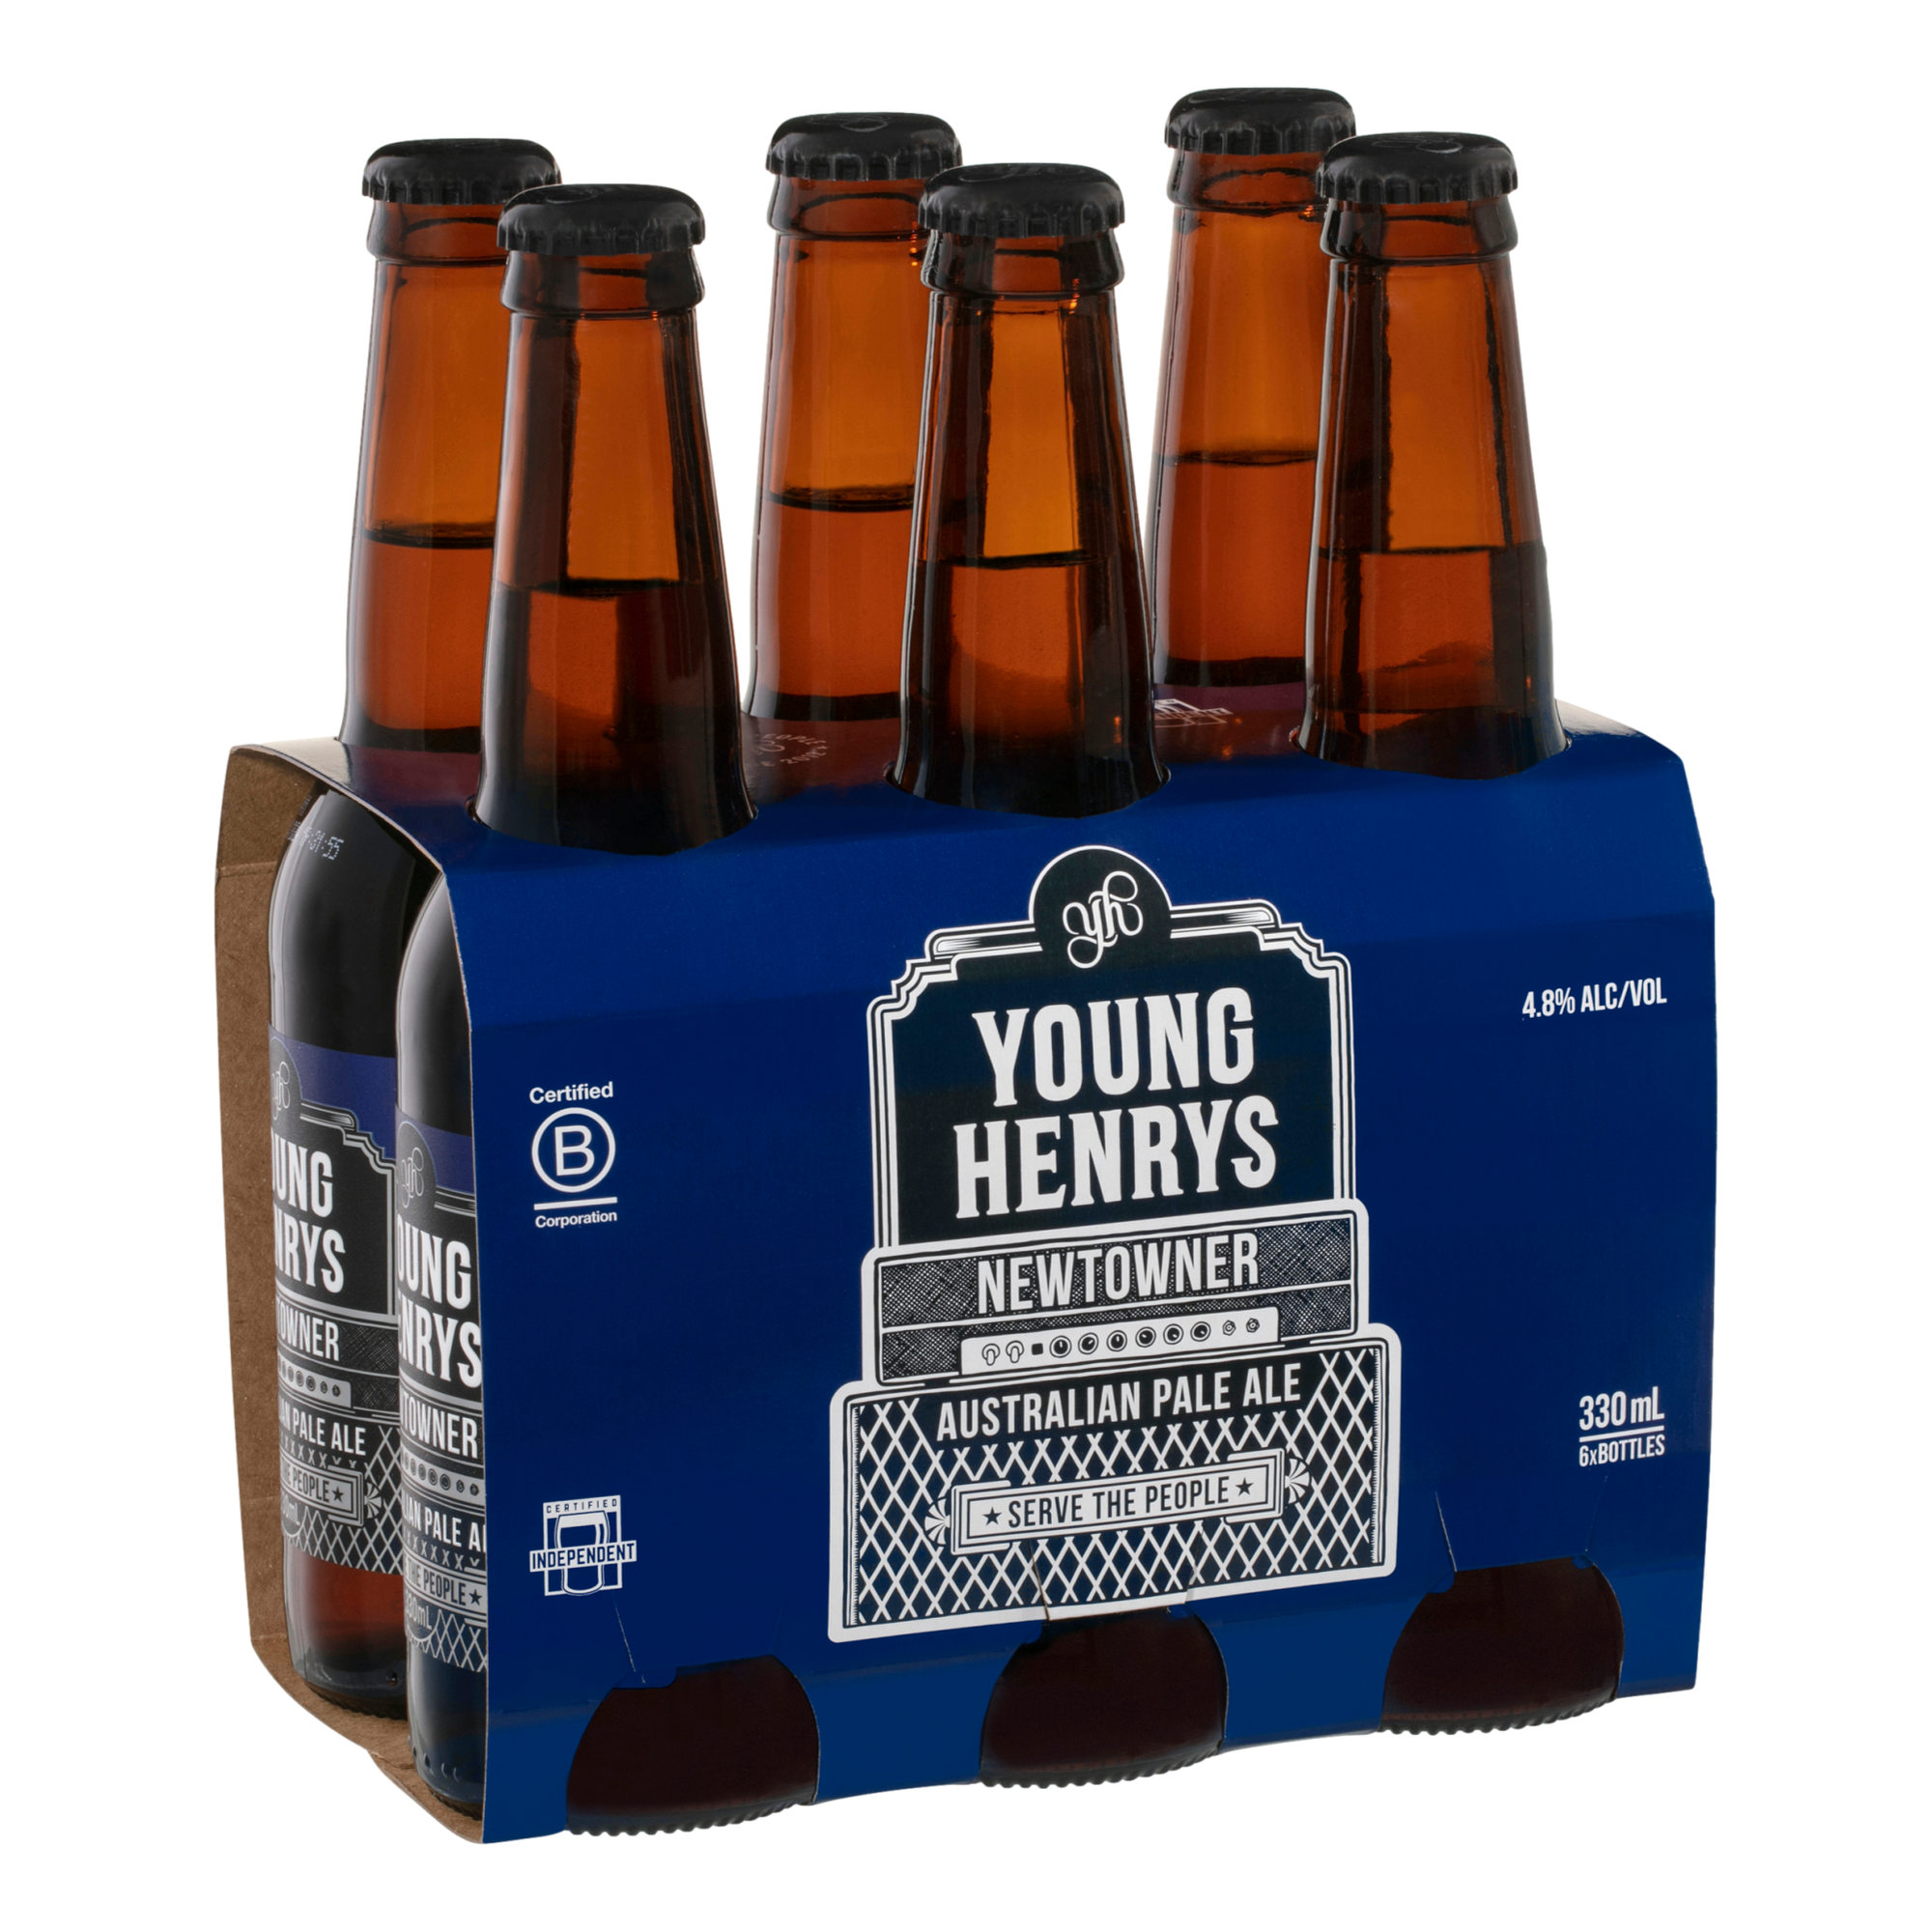 Young Henrys Newtowner Pale Ale 330ml Bottle 6 Pack